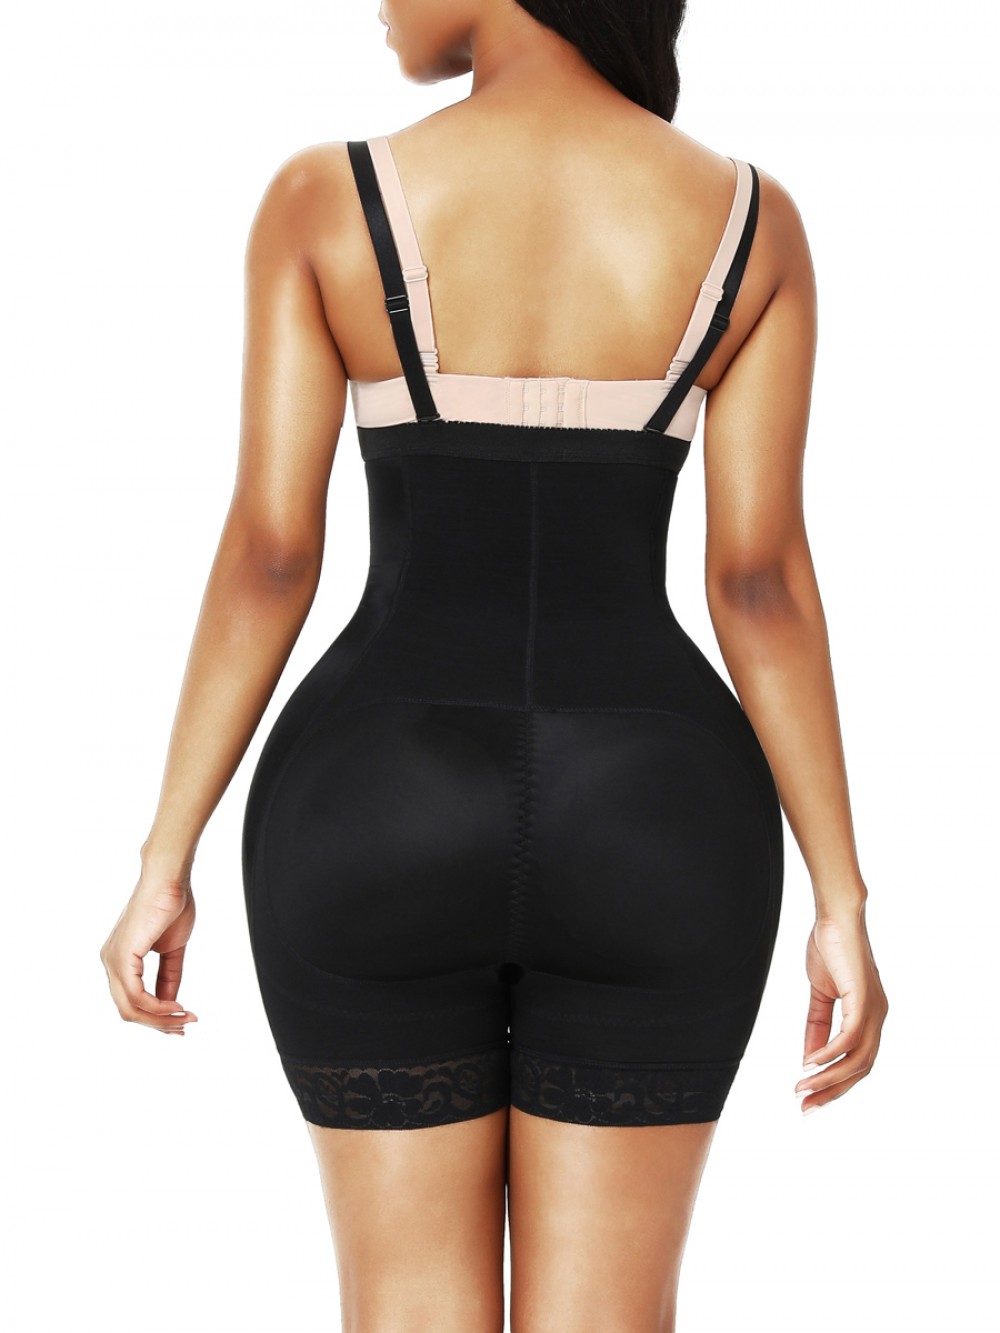 Butt Lifter Black High Waist Lace Removable Pads Firm Compression